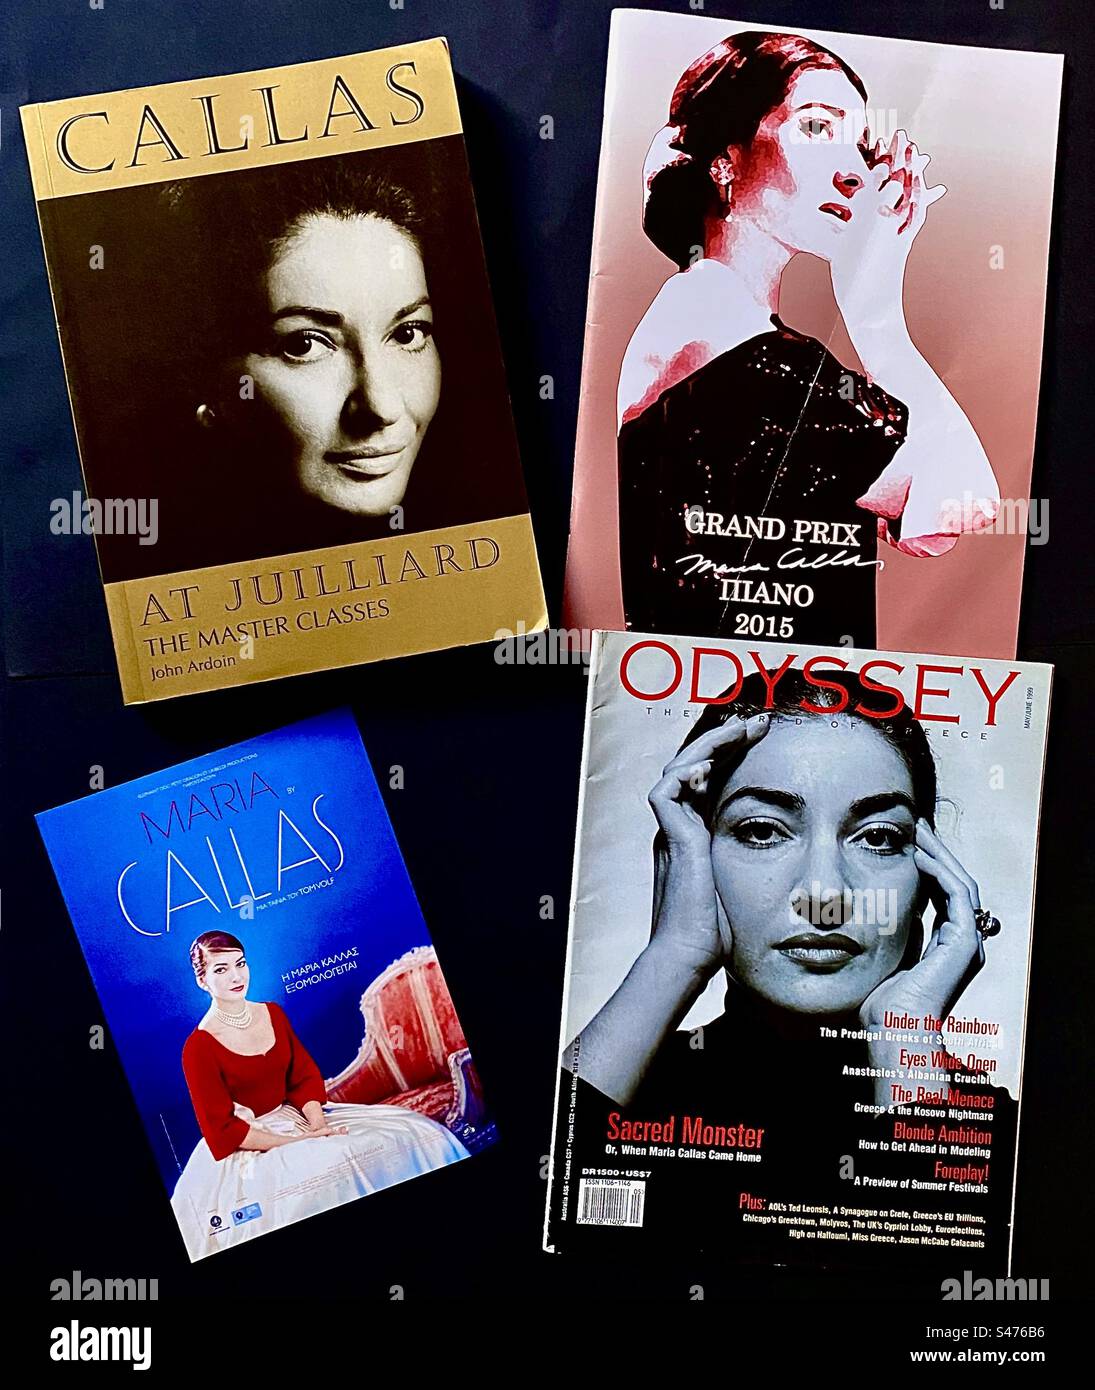 4 images of Maria Callas (1923-77), arguably the most famous opera singer in the 20th century if not all time. A book, a magazine, a competition programme, and a flyer. Admirers called he ‘La Divina’. Stock Photo